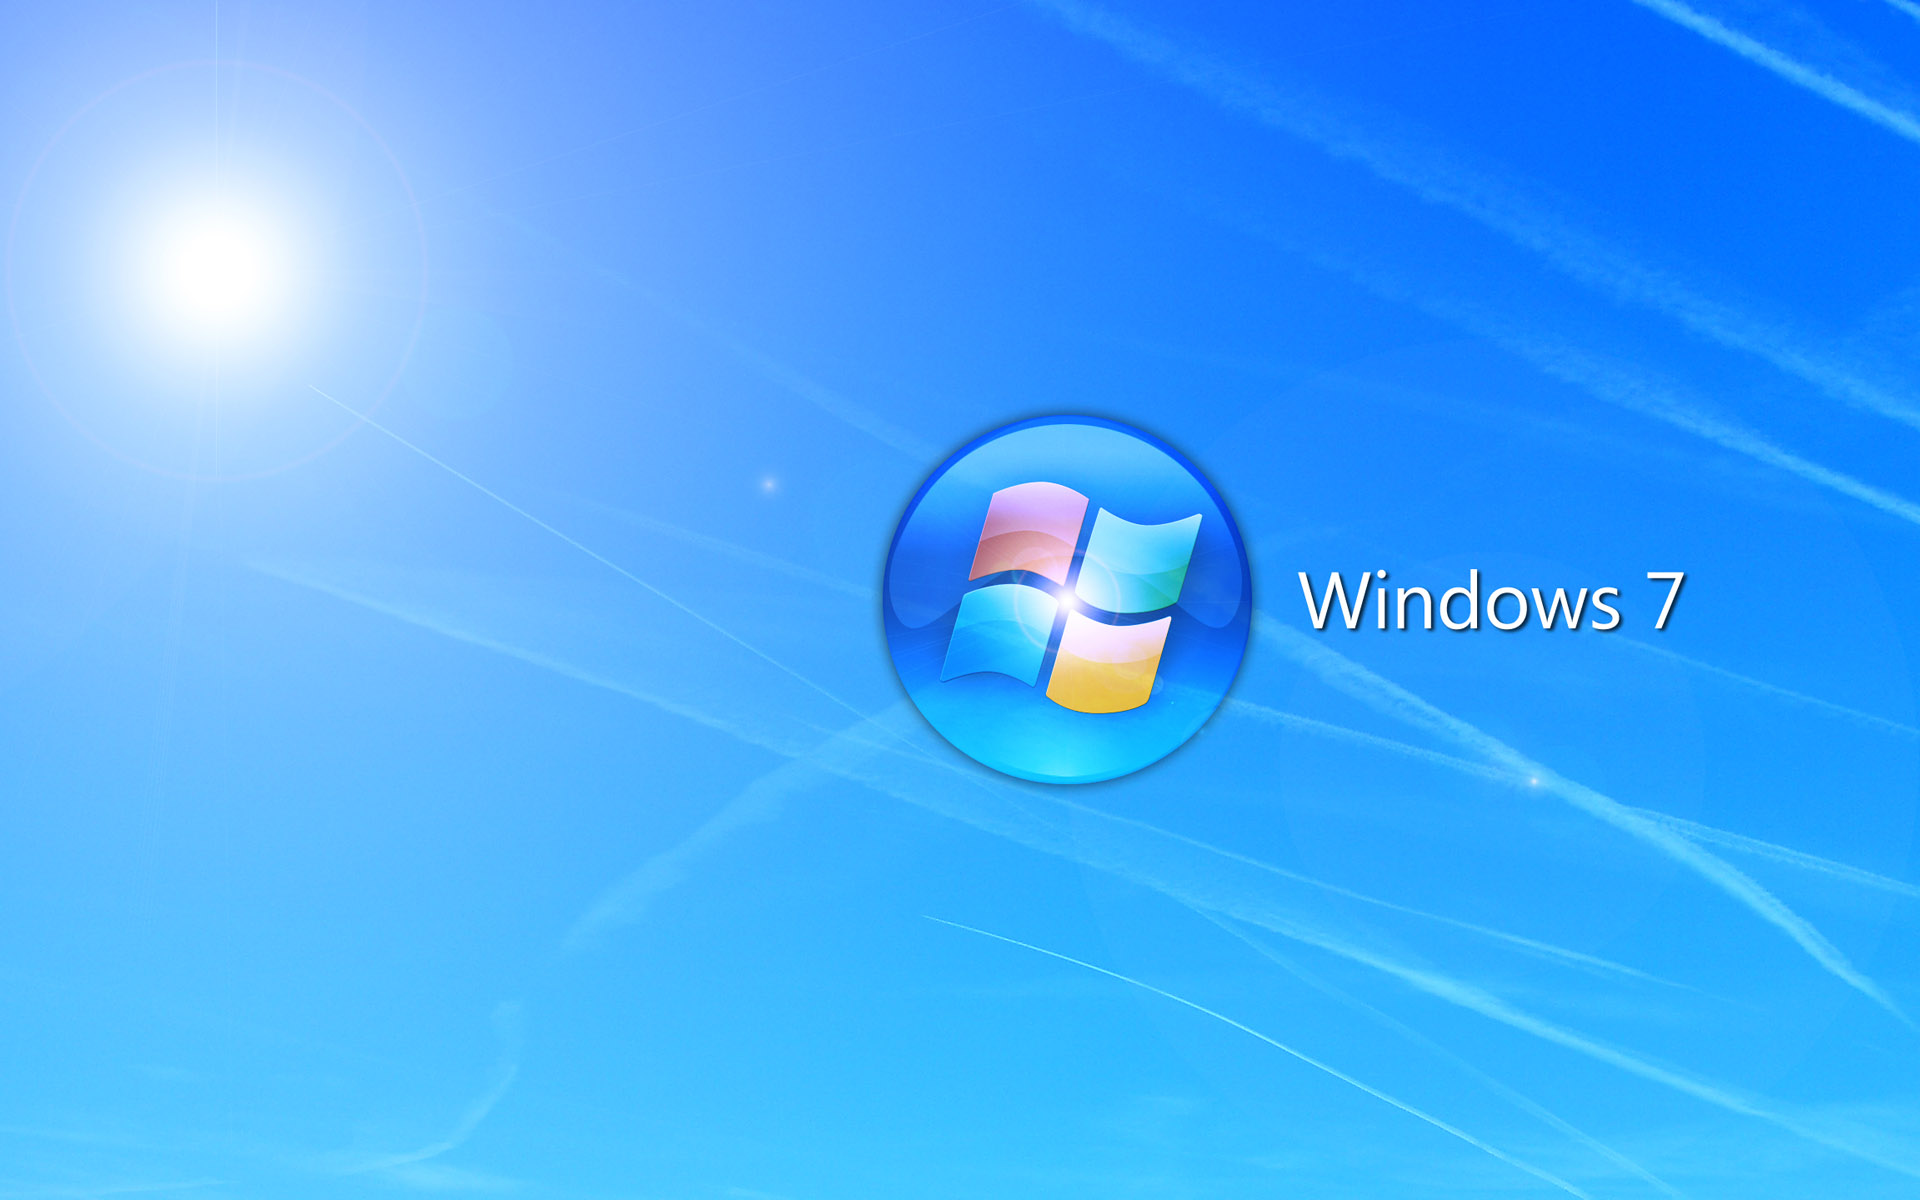  Windows 7 cover hd Wallpaper and make this wallpaper for your desktop